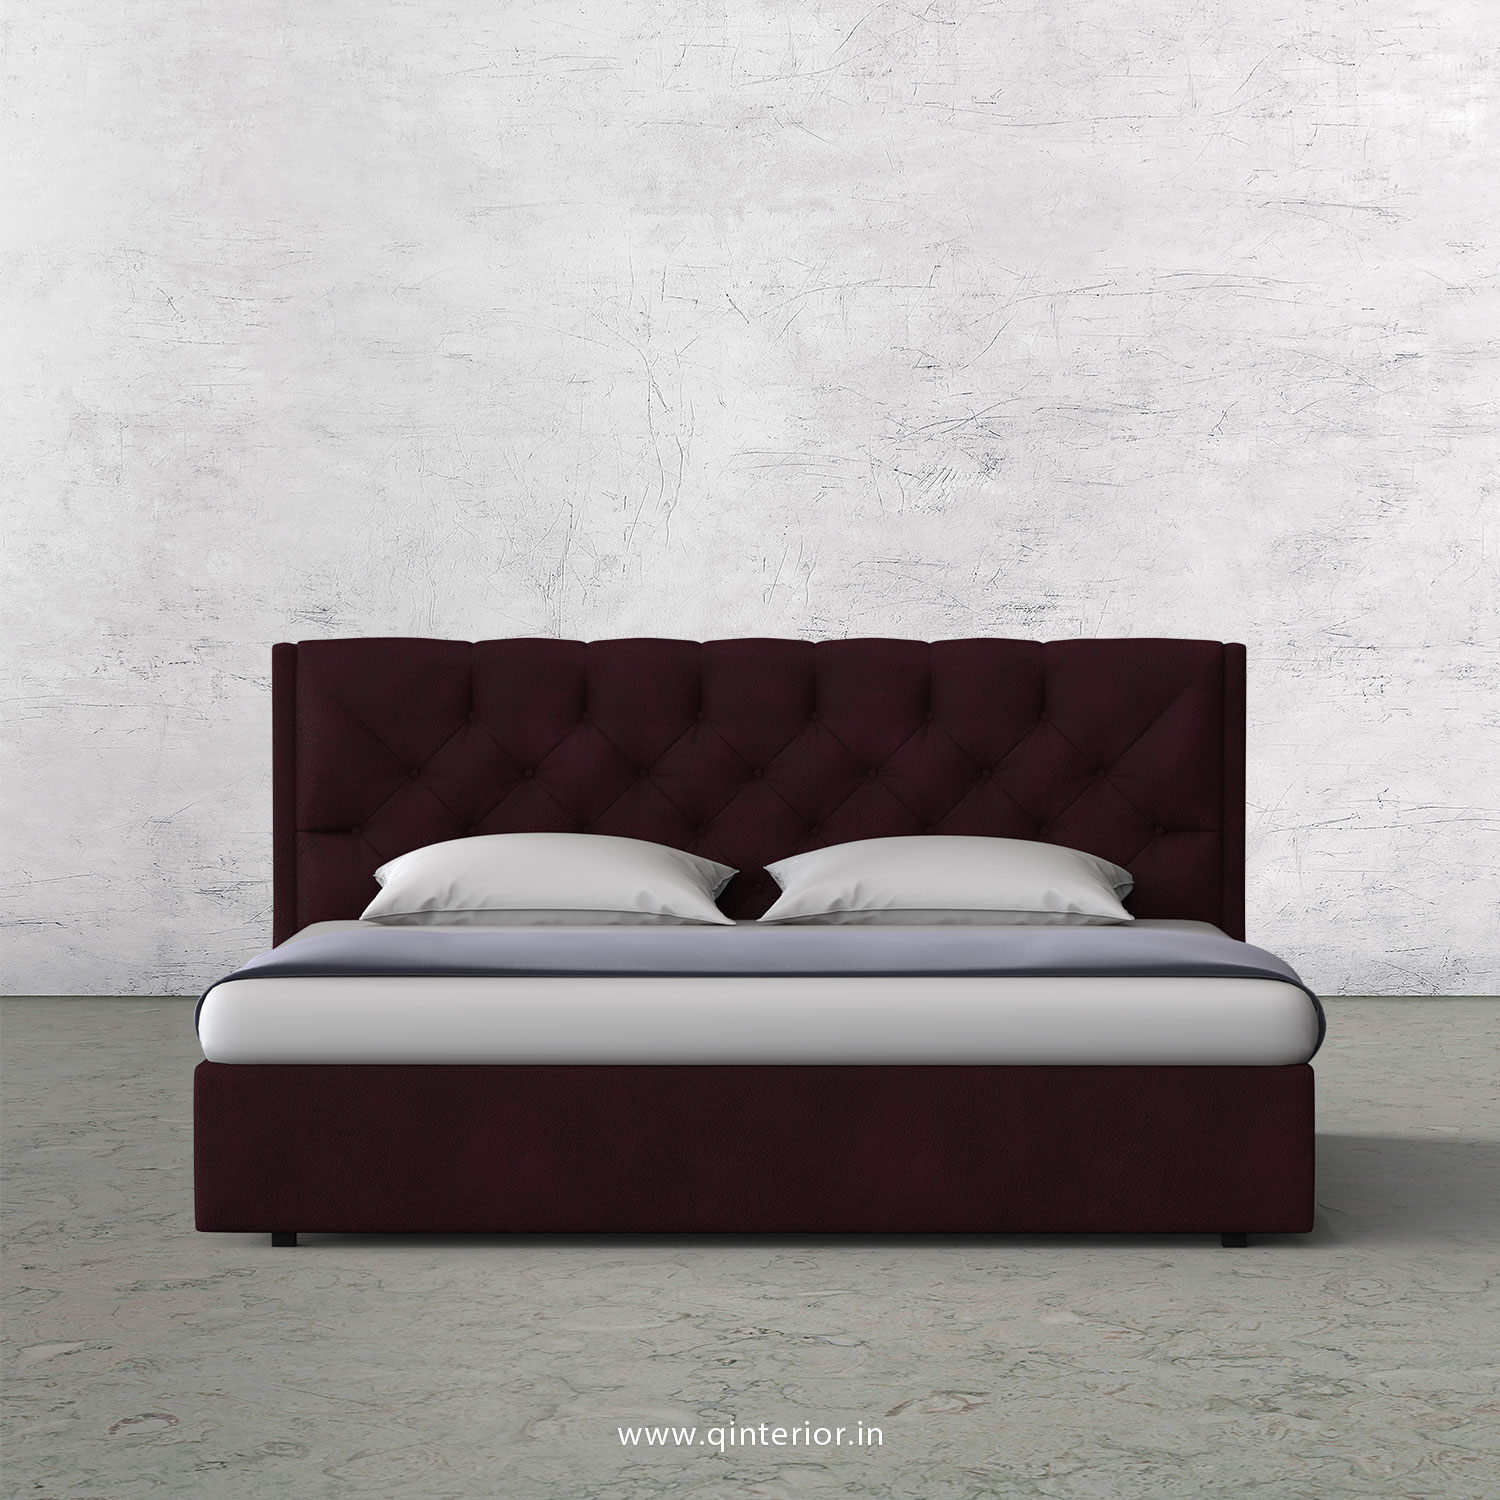 Scorpius Queen Bed in Fab Leather Fabric - QBD009 FL12